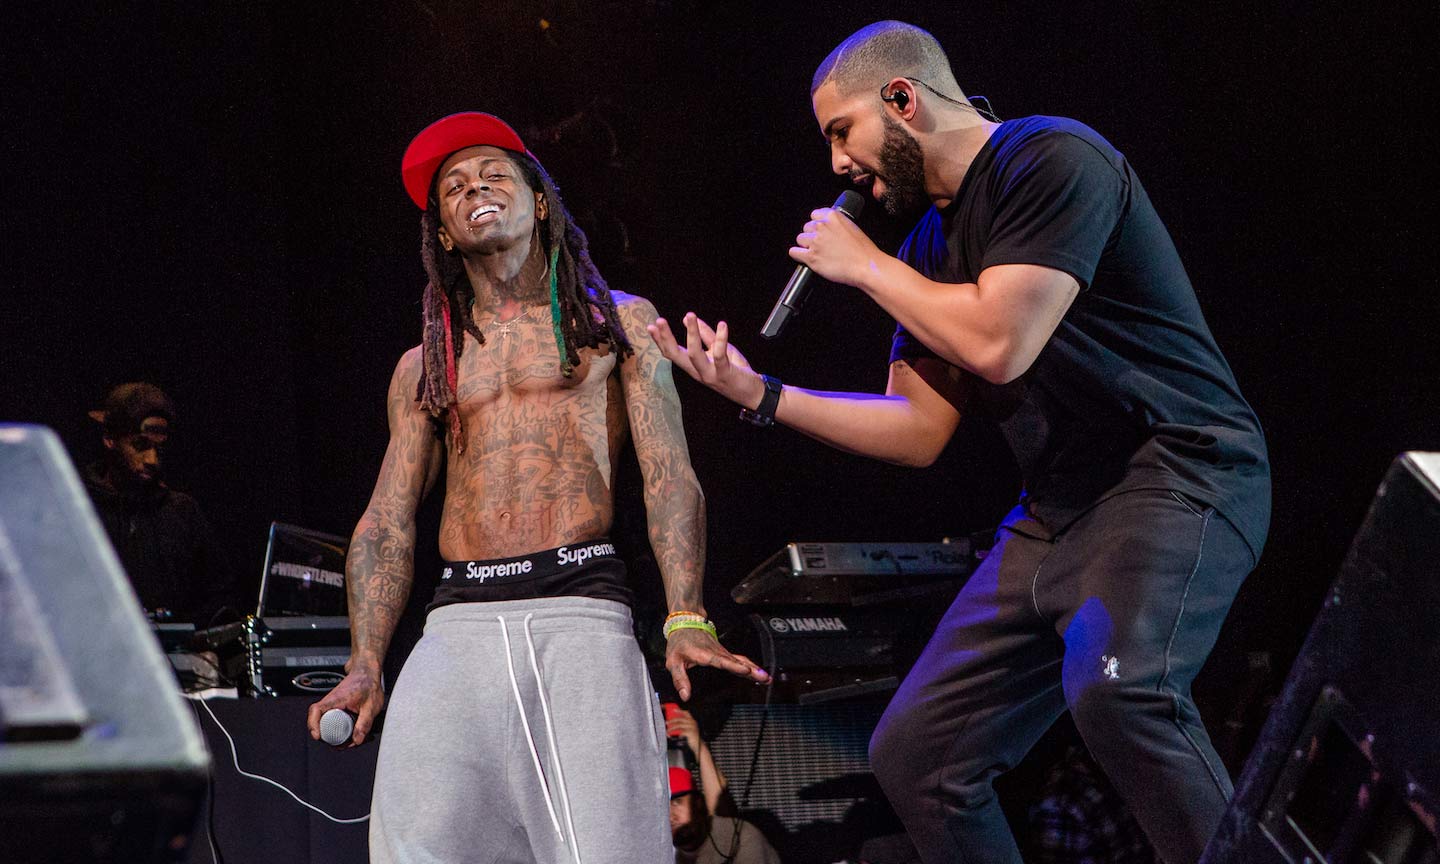 ‘Love Me’: When Lil Wayne Made A Pop Posse Cut With Drake And Future #LilWayne